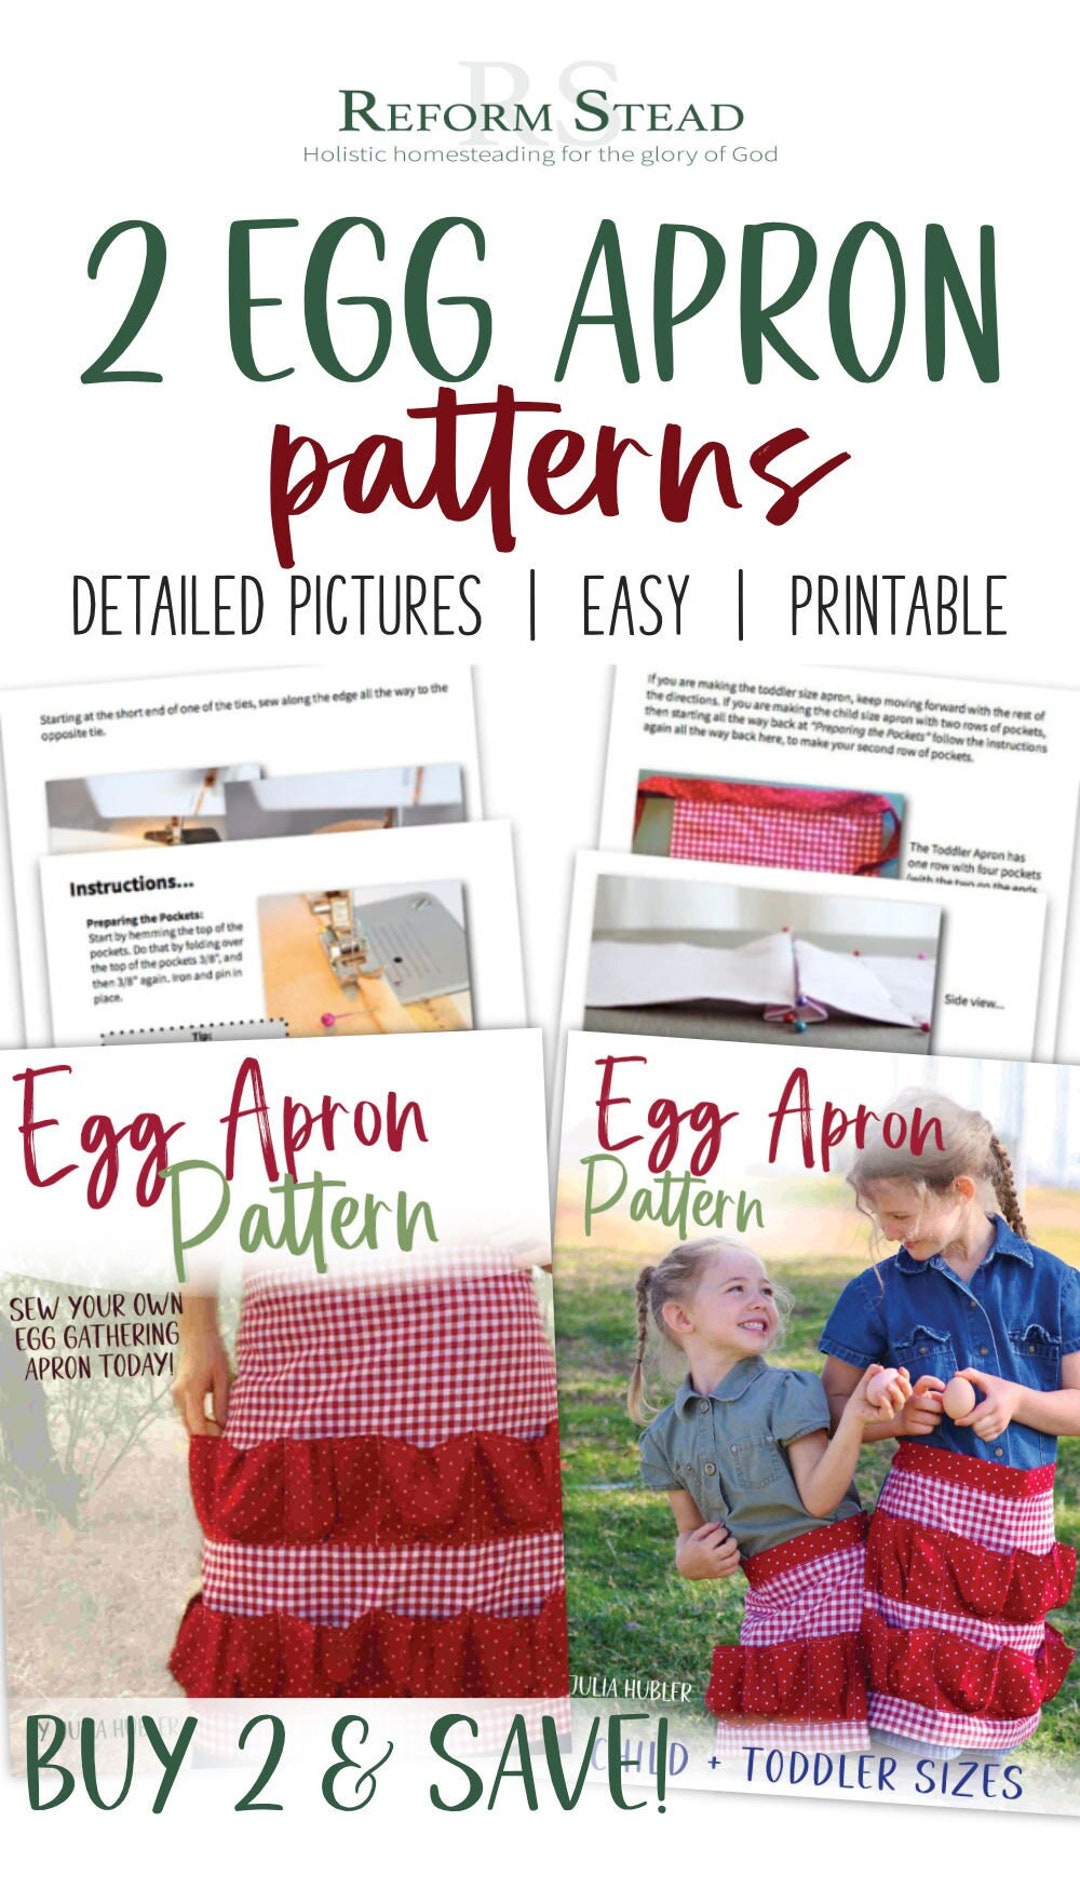 Easy Egg Collecting Apron for Farmers. Fast to Sew in a Weekend